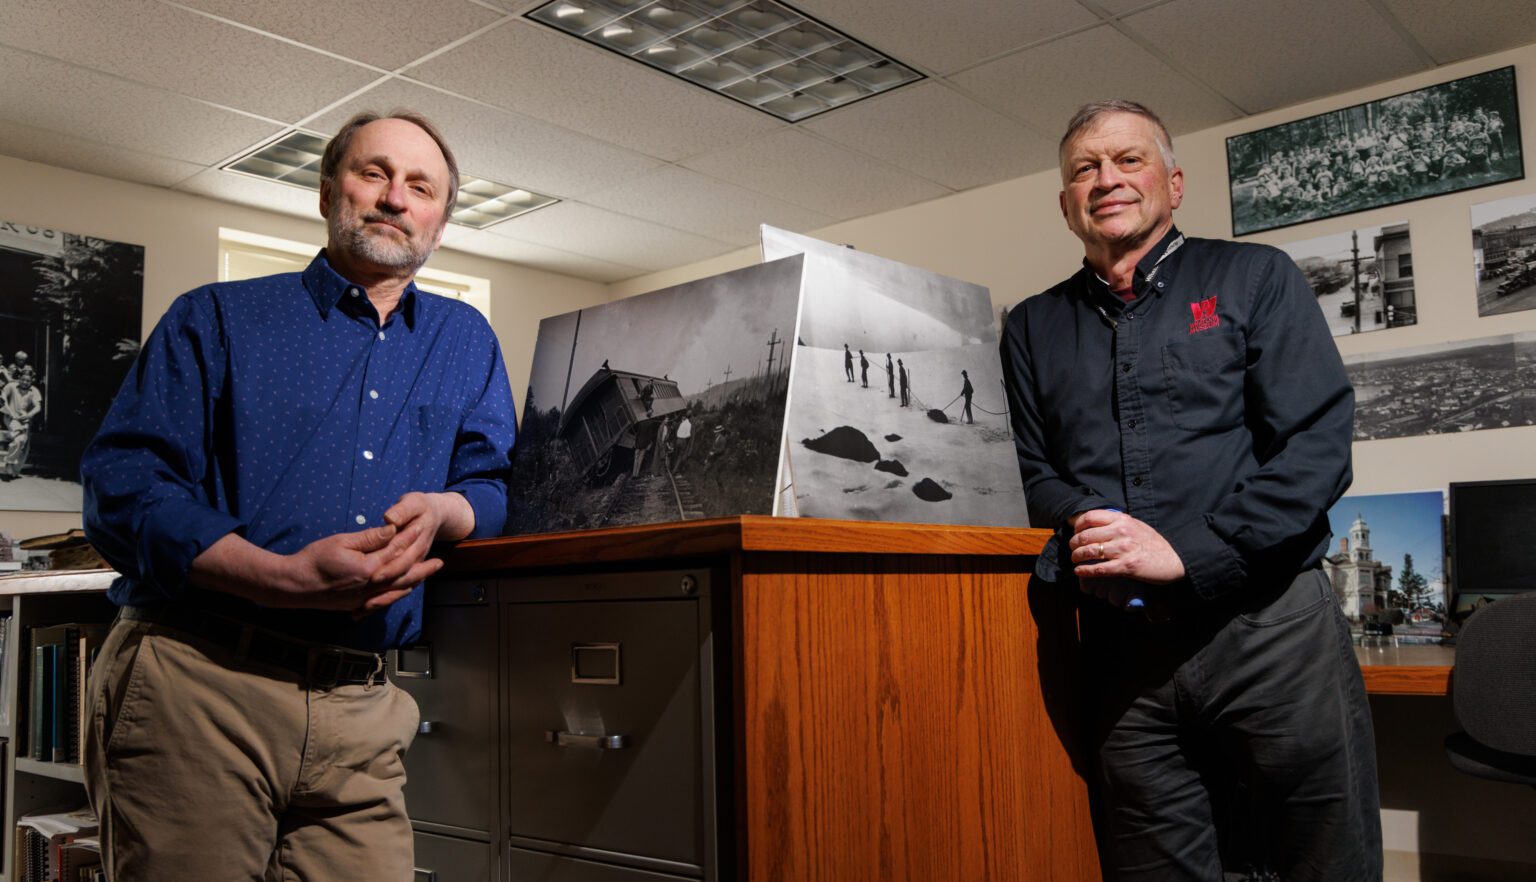 Todd Warger and Archivist Jeff Jewell leaning against the wooden desk showcasing propped up vintage photos of Whatcom.